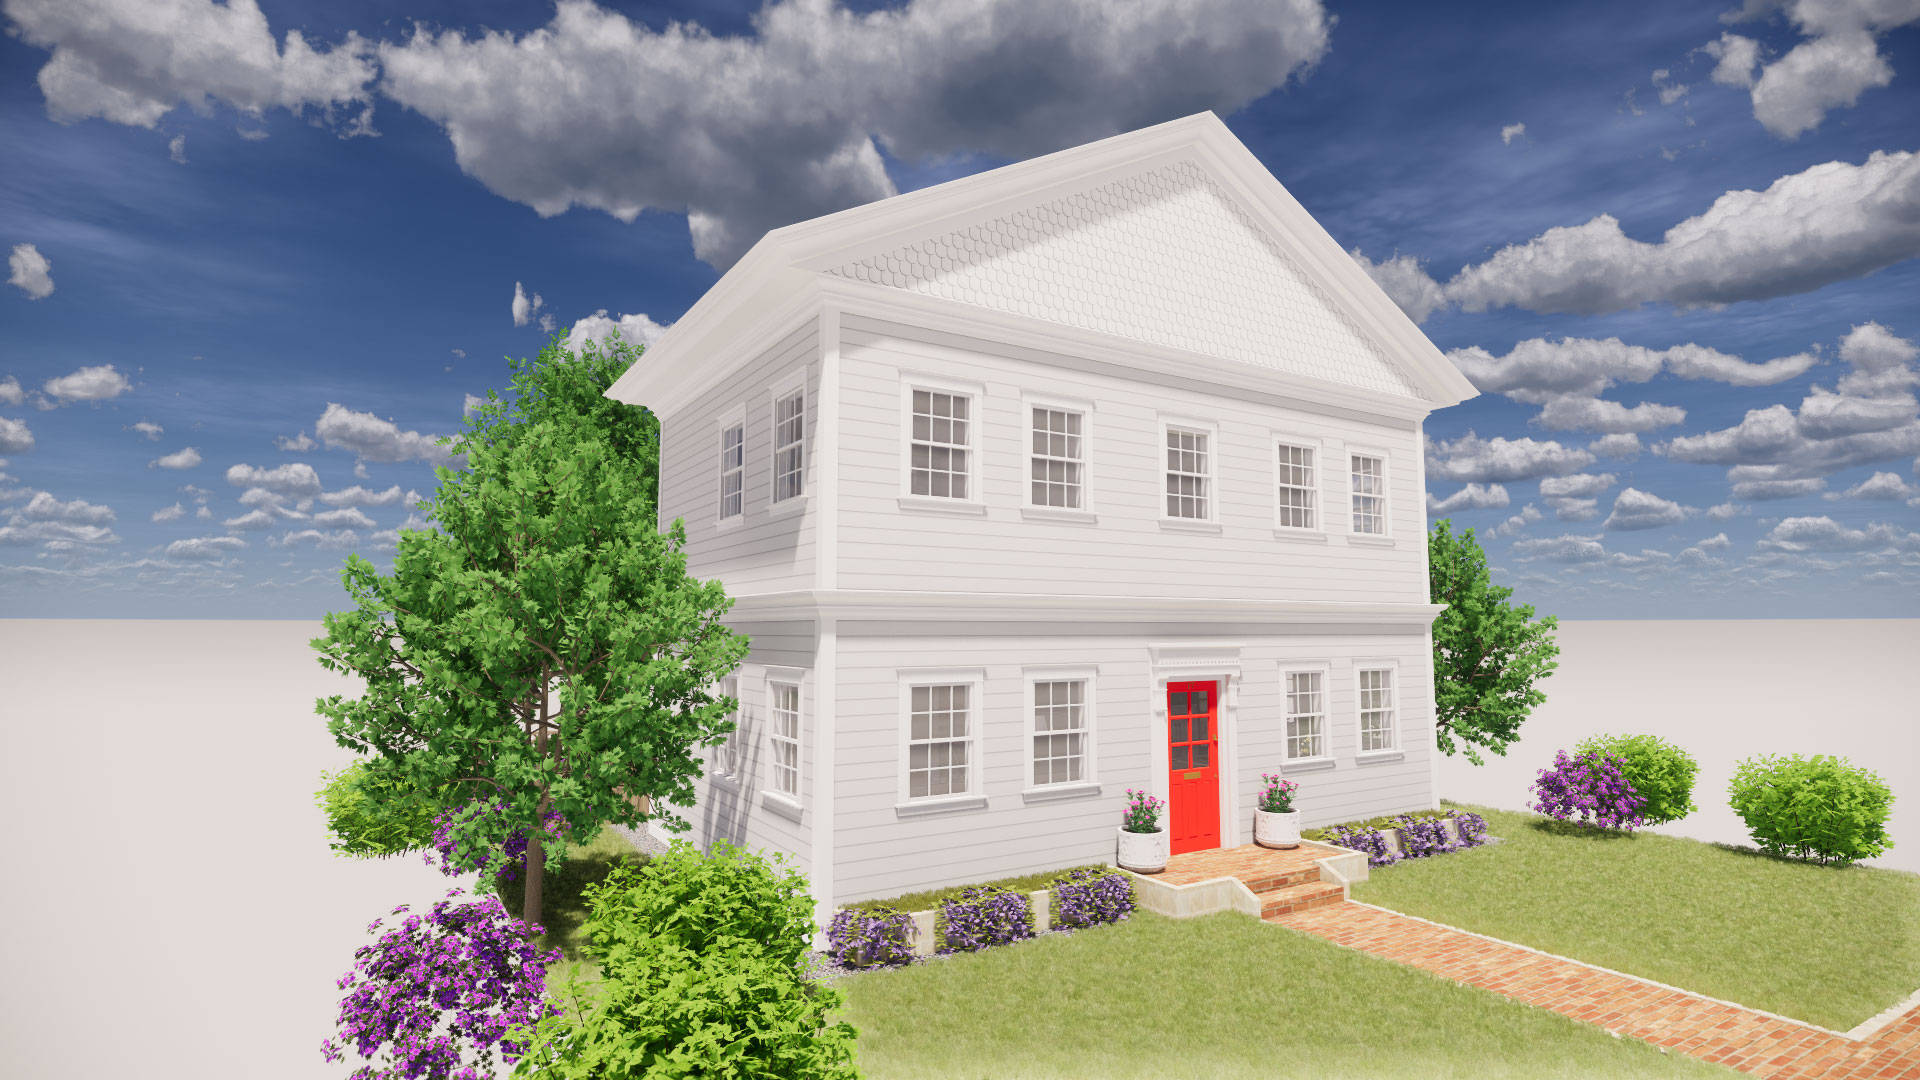 Render of two story style for colonial home at ground level perspective, with red front door and many windows.